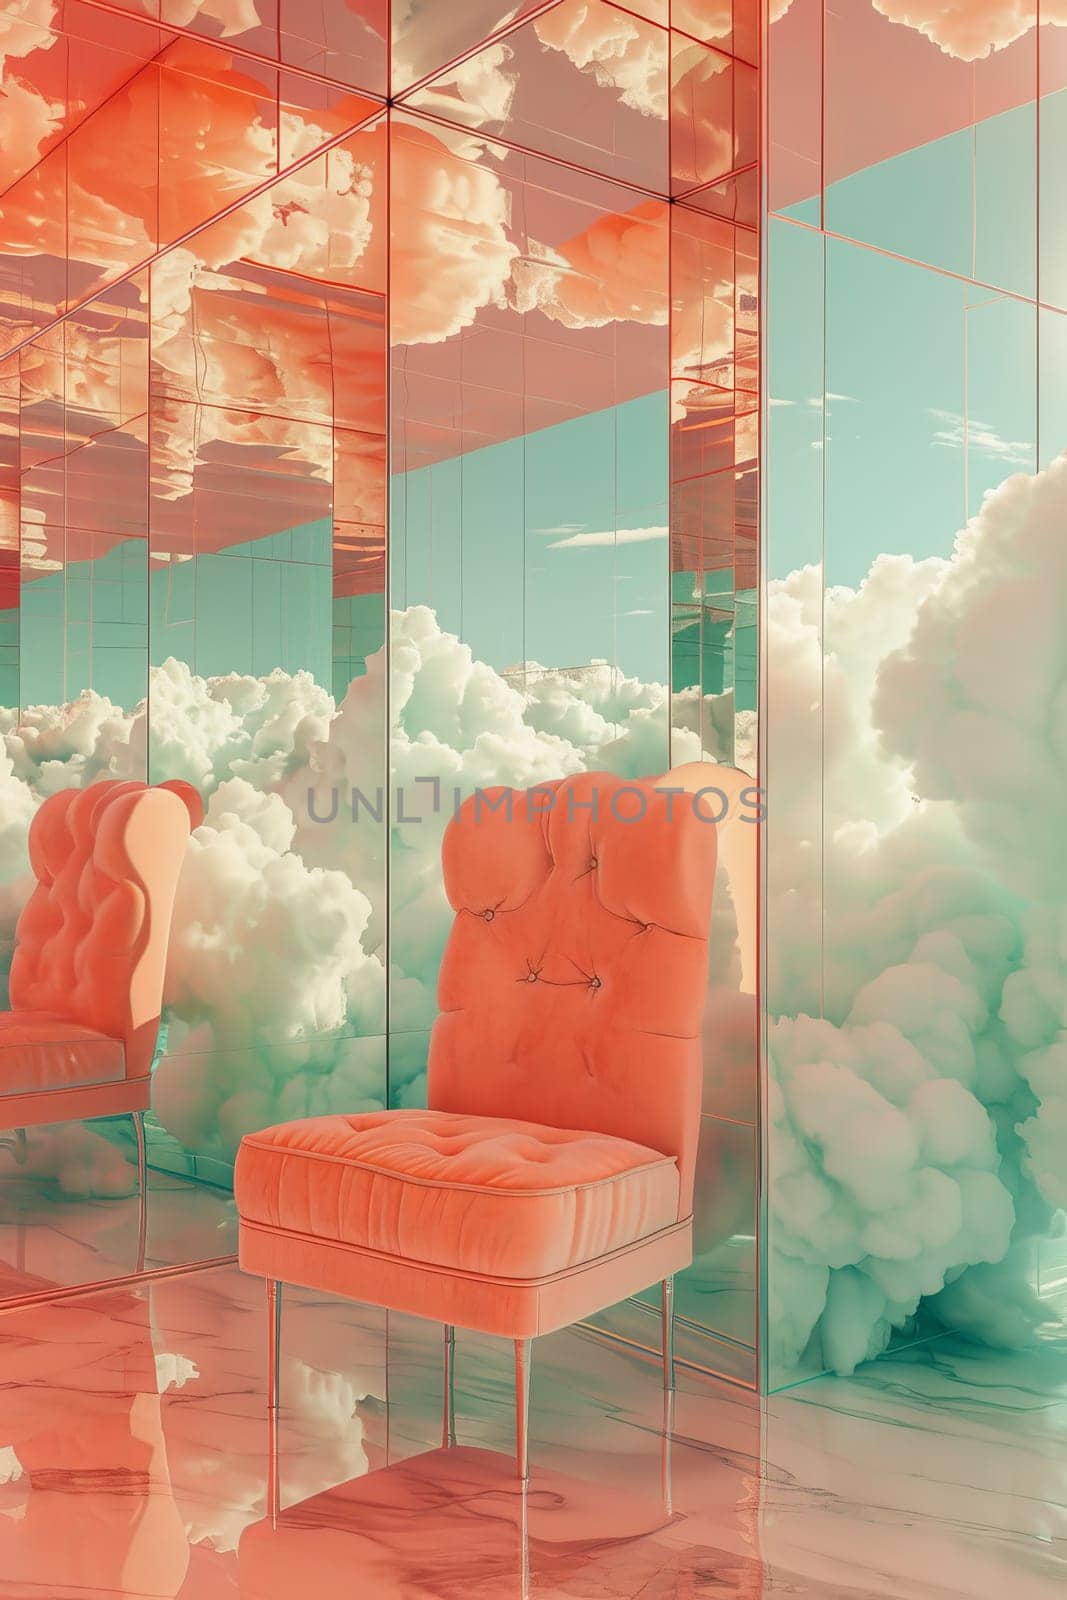 A room with a chair and a mirror. The room is filled with clouds and the chair is the only object in the room